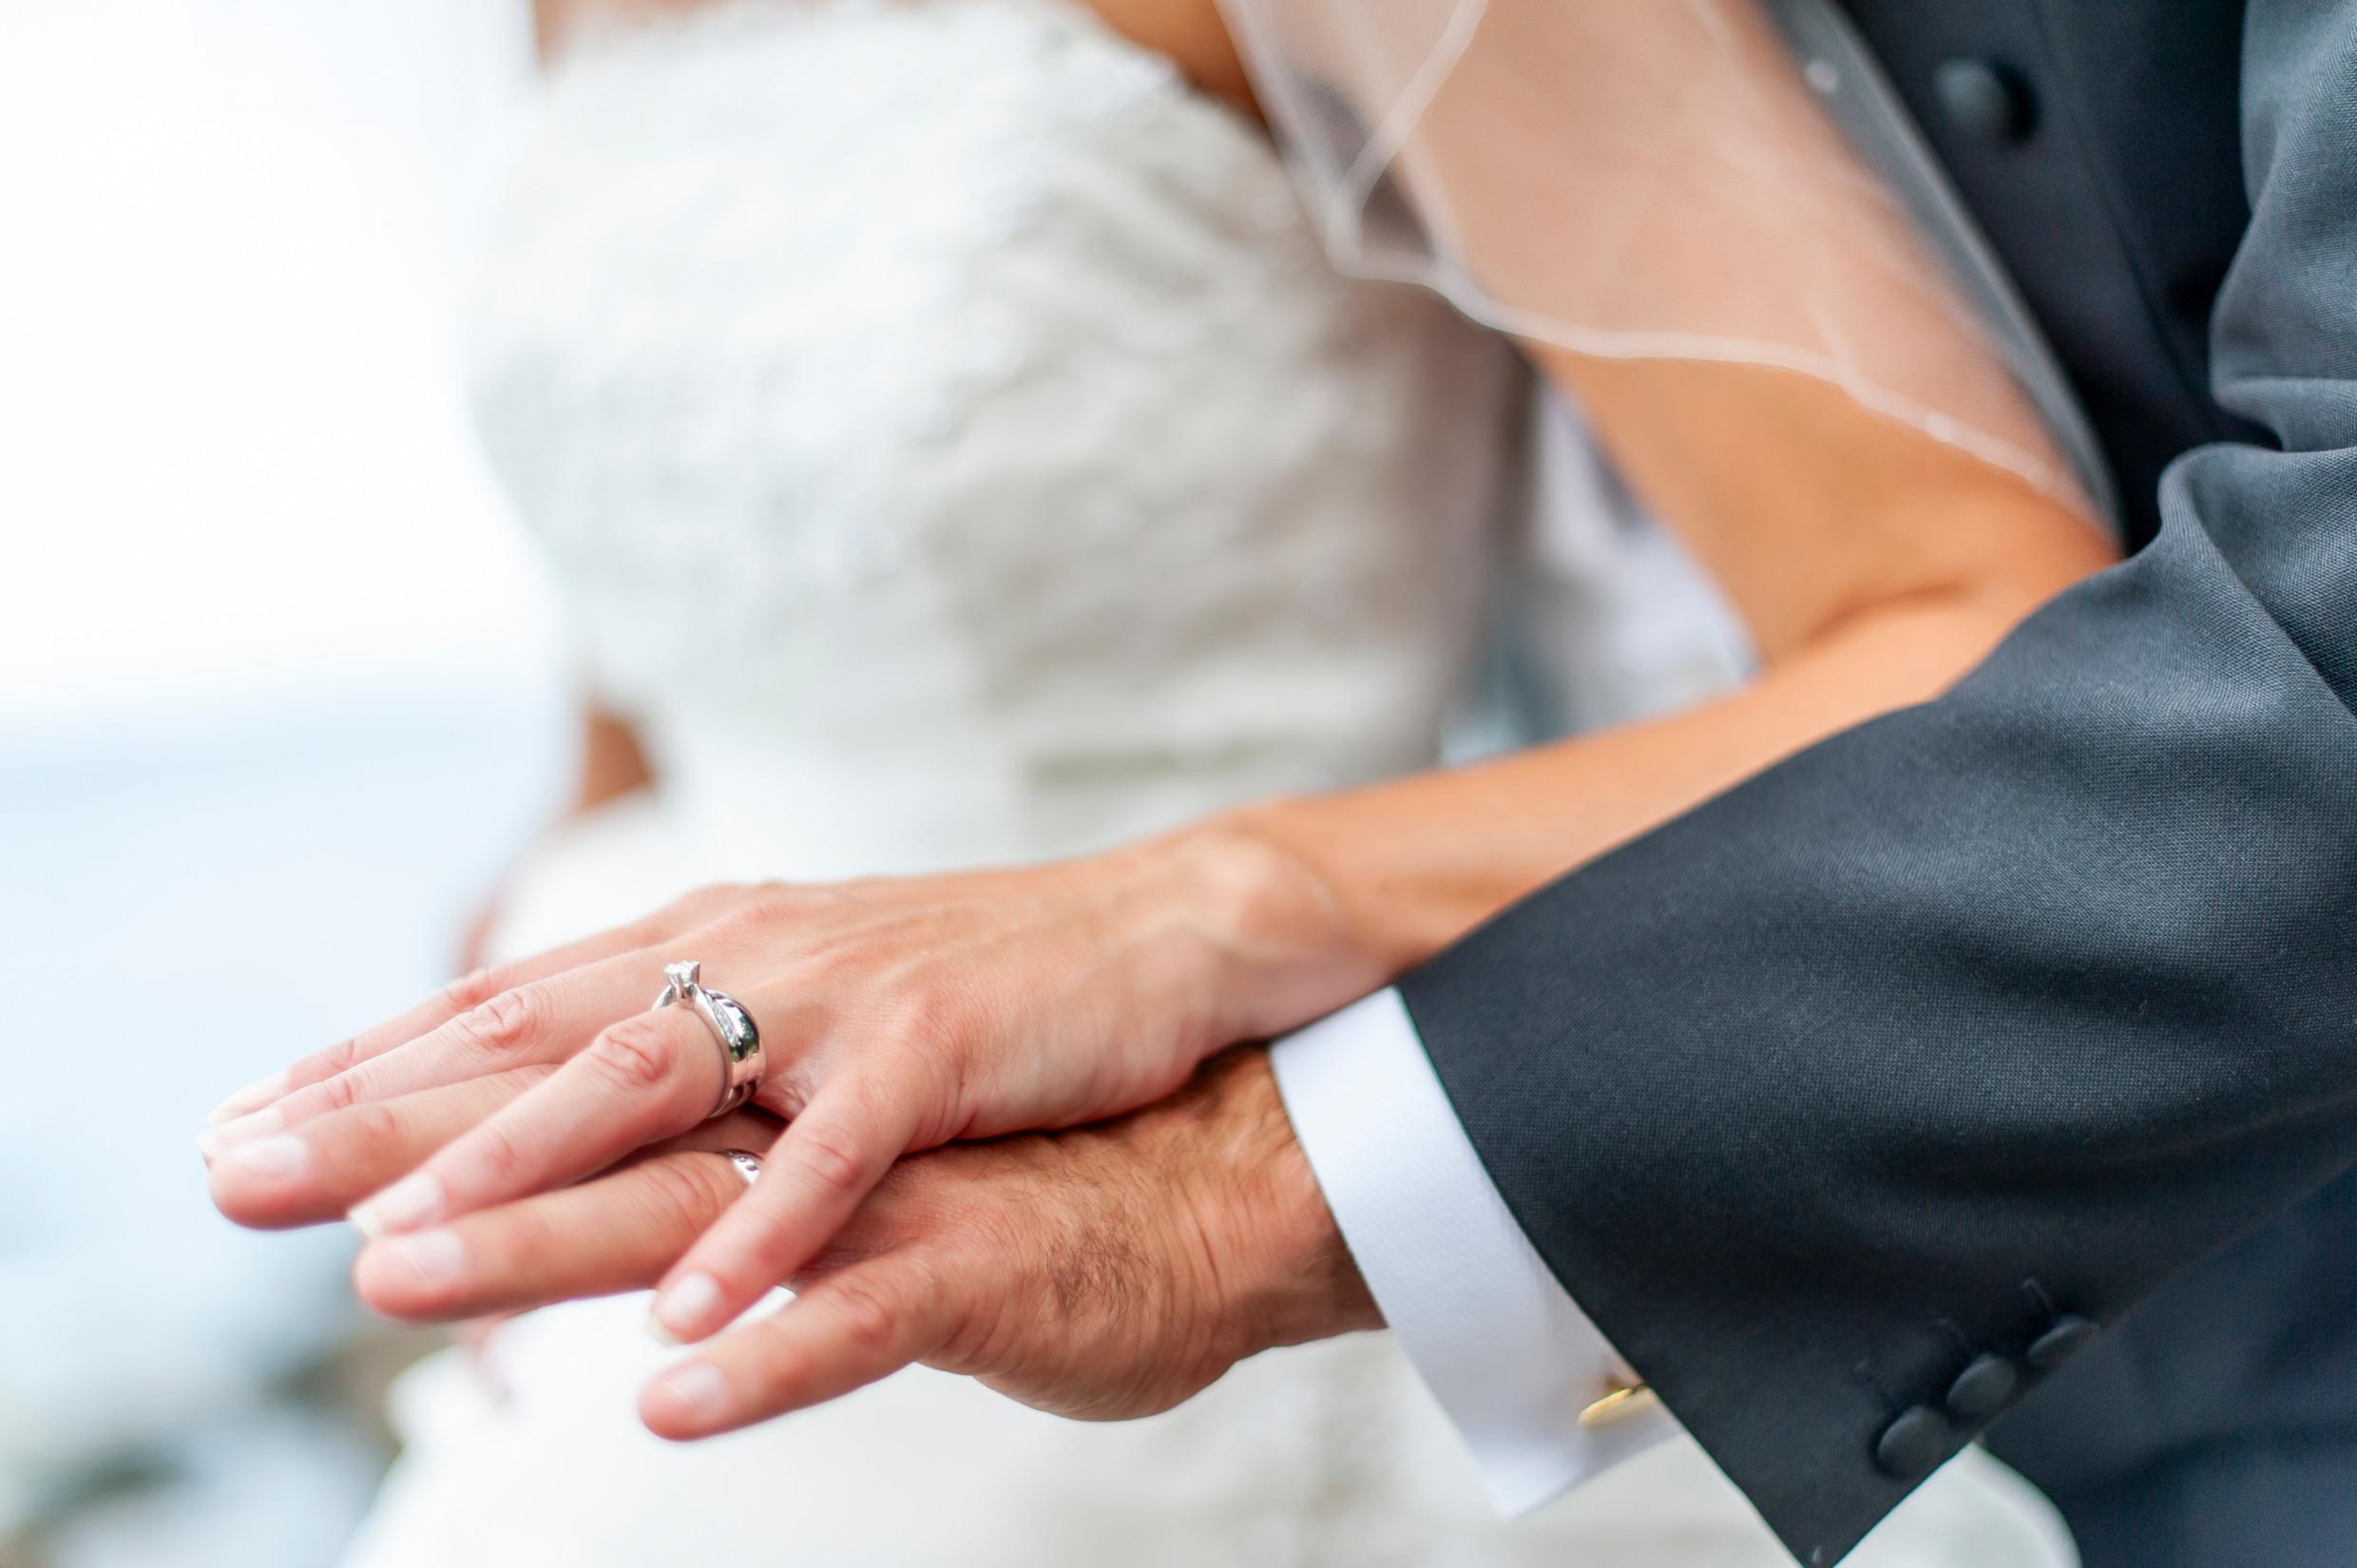 Close-up of a man and woman with wedding bands.